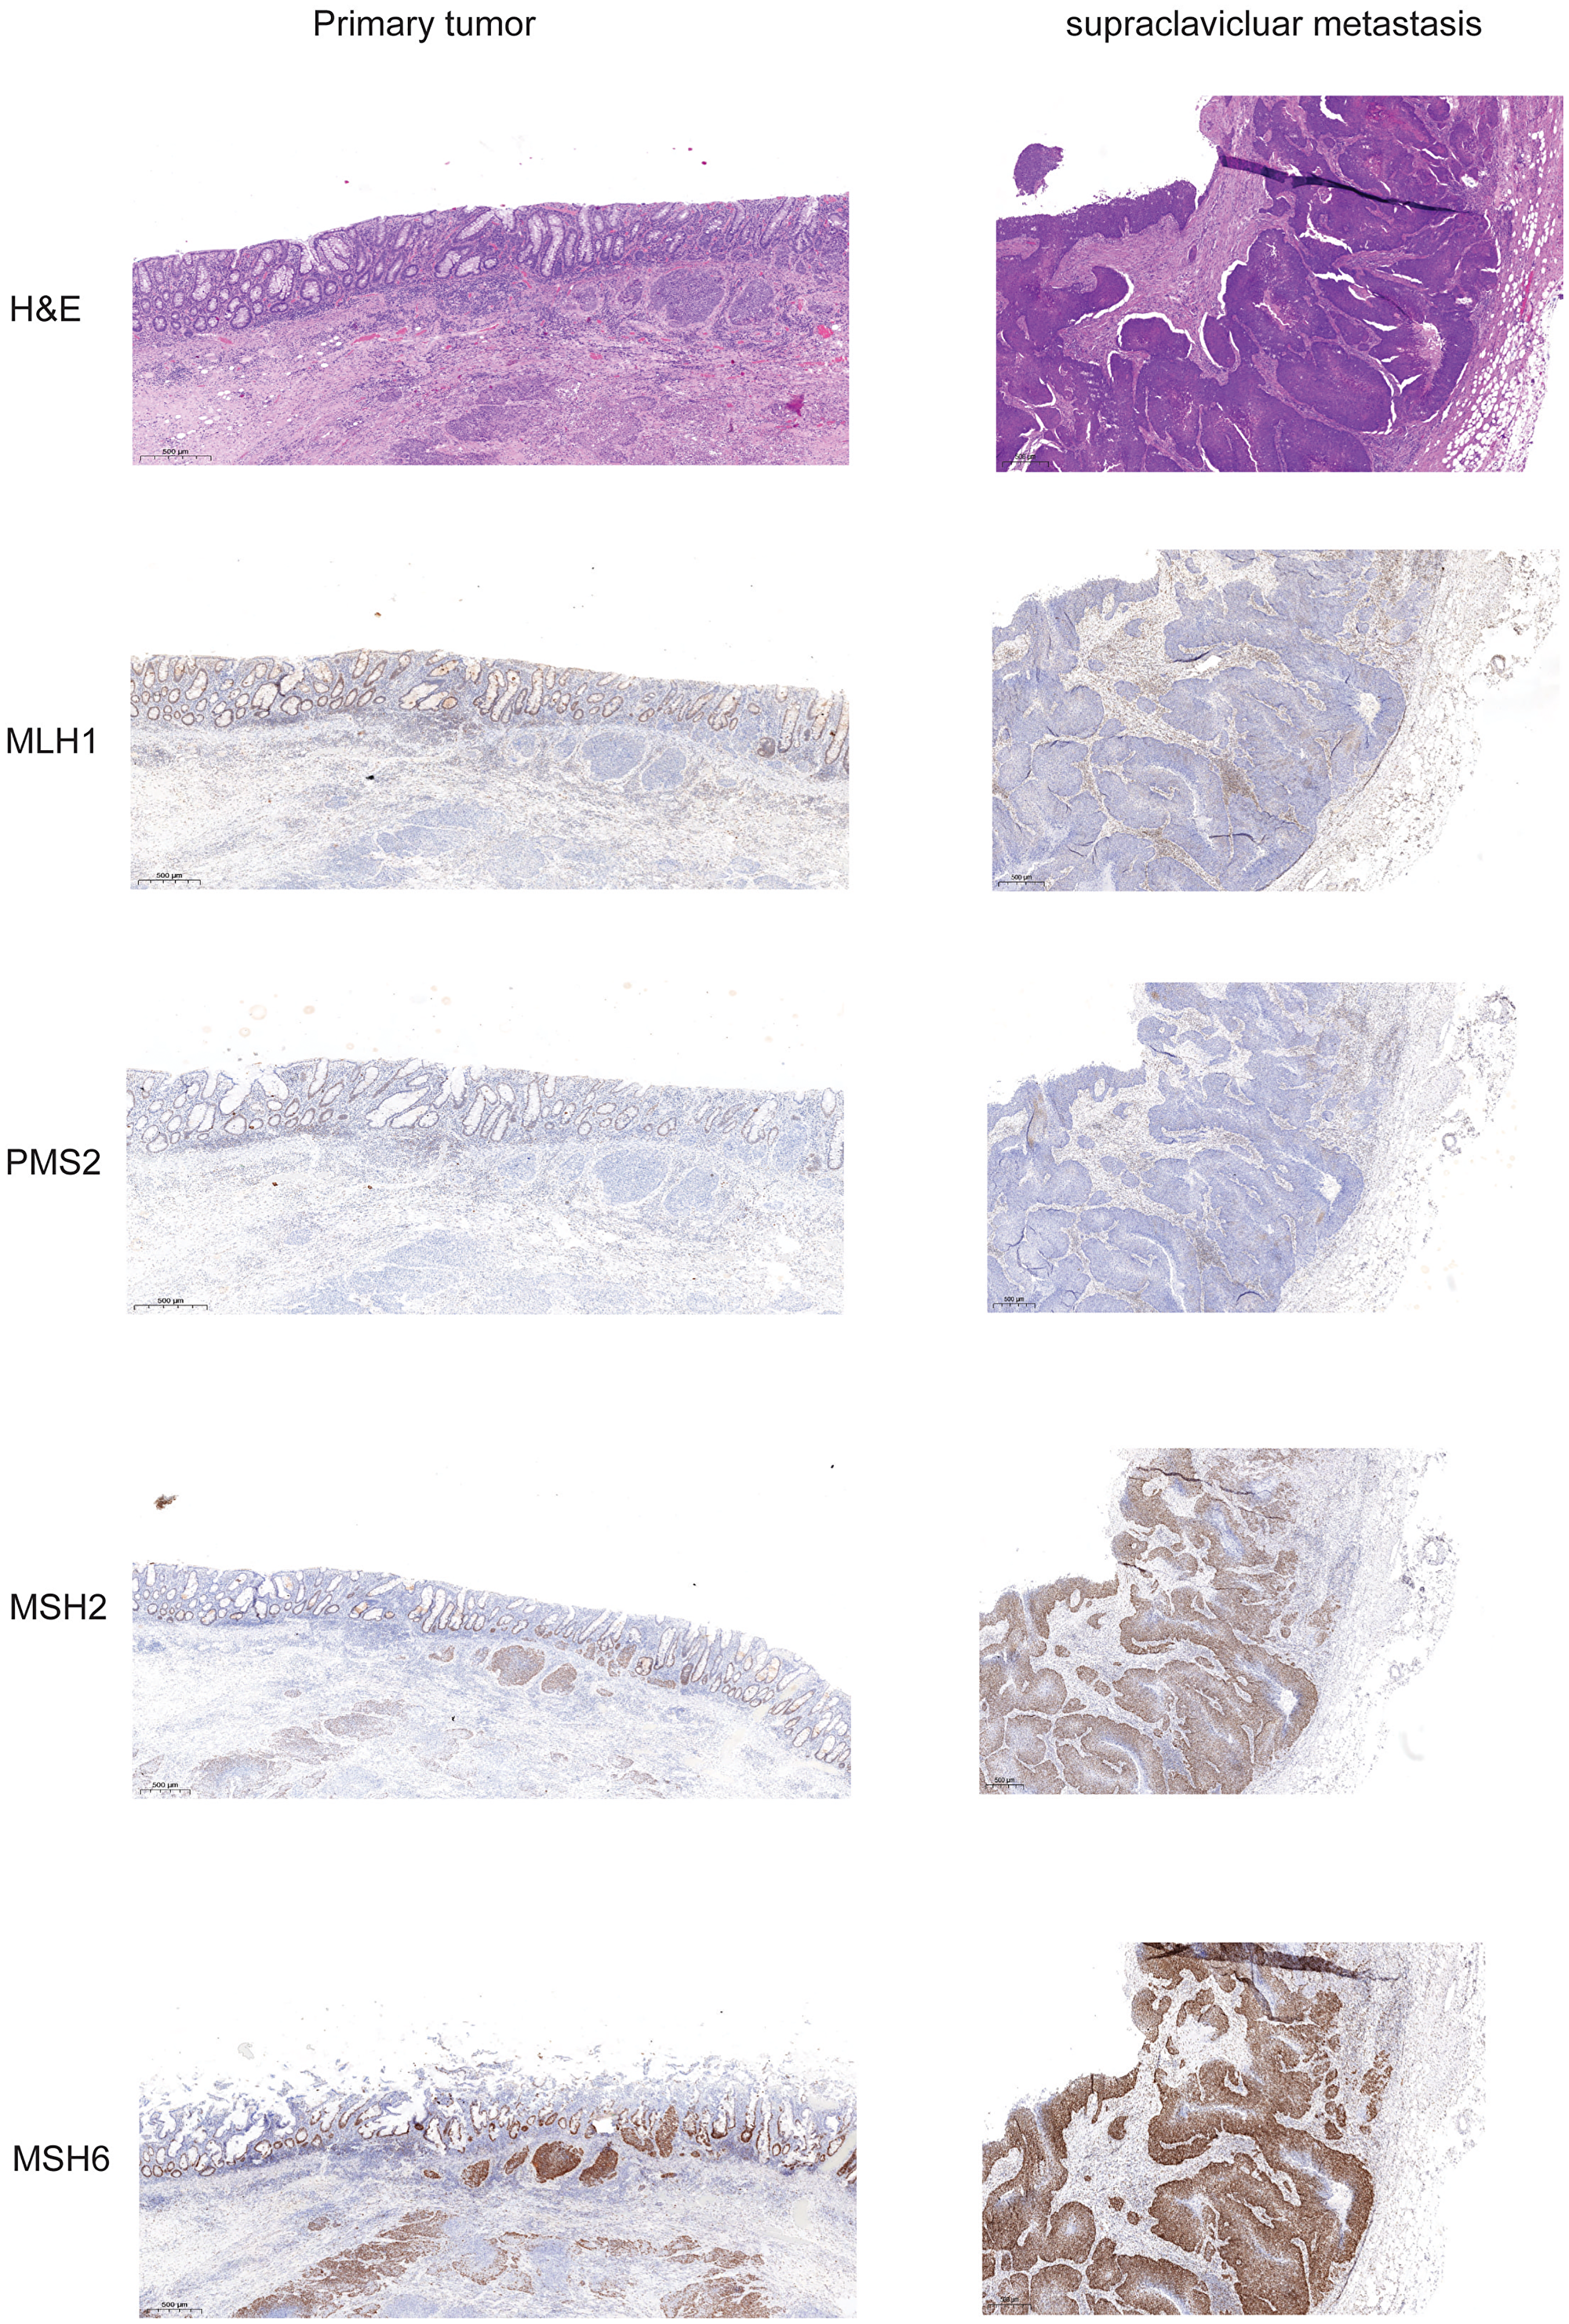 Expression of mismatch repair proteins in primary tumor and supraclavicular metastasis.